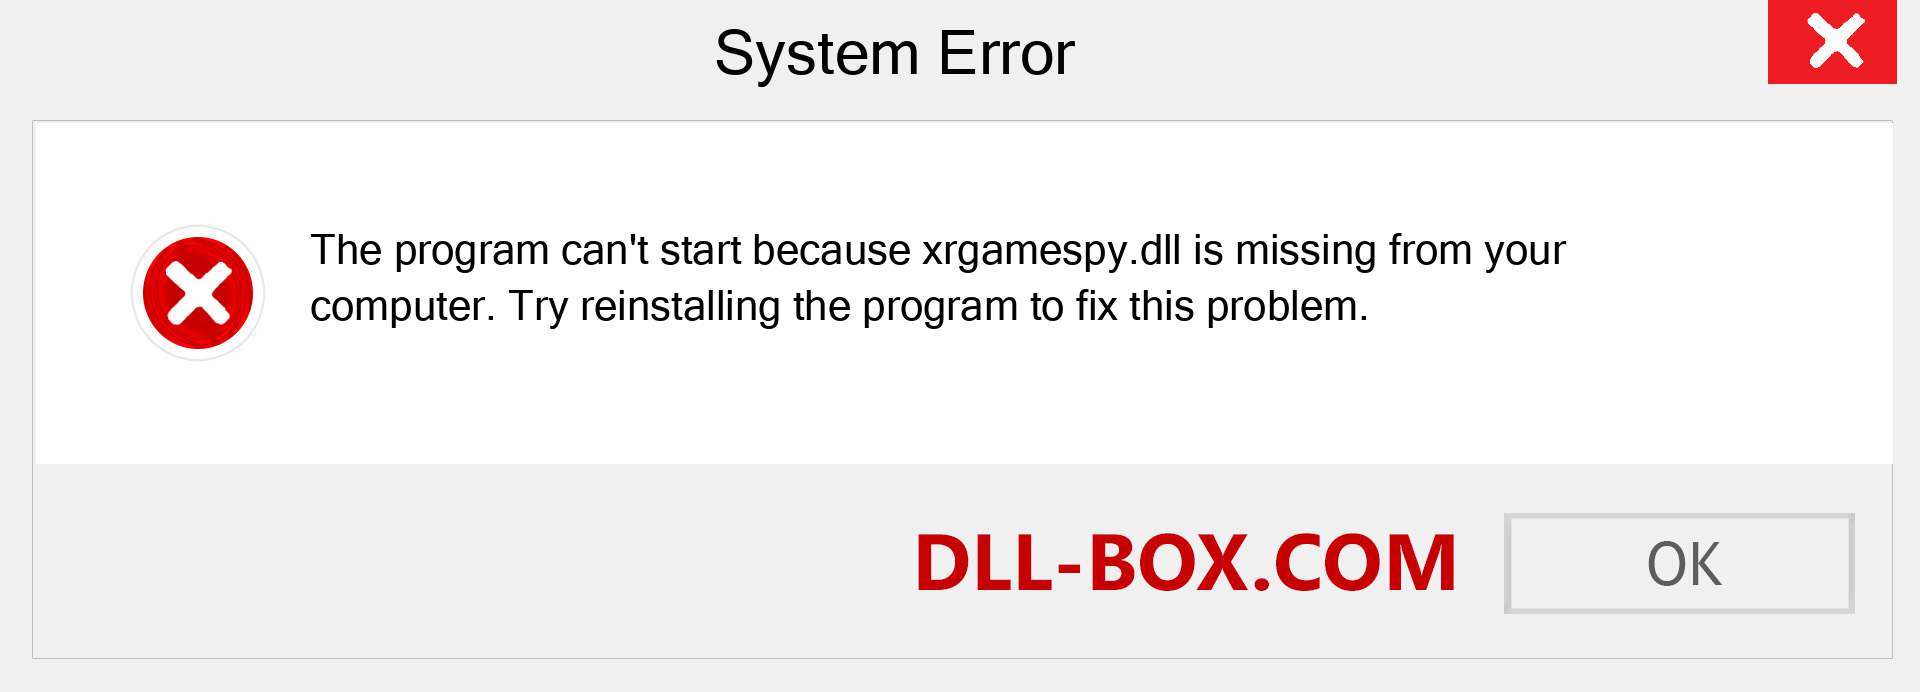  xrgamespy.dll file is missing?. Download for Windows 7, 8, 10 - Fix  xrgamespy dll Missing Error on Windows, photos, images